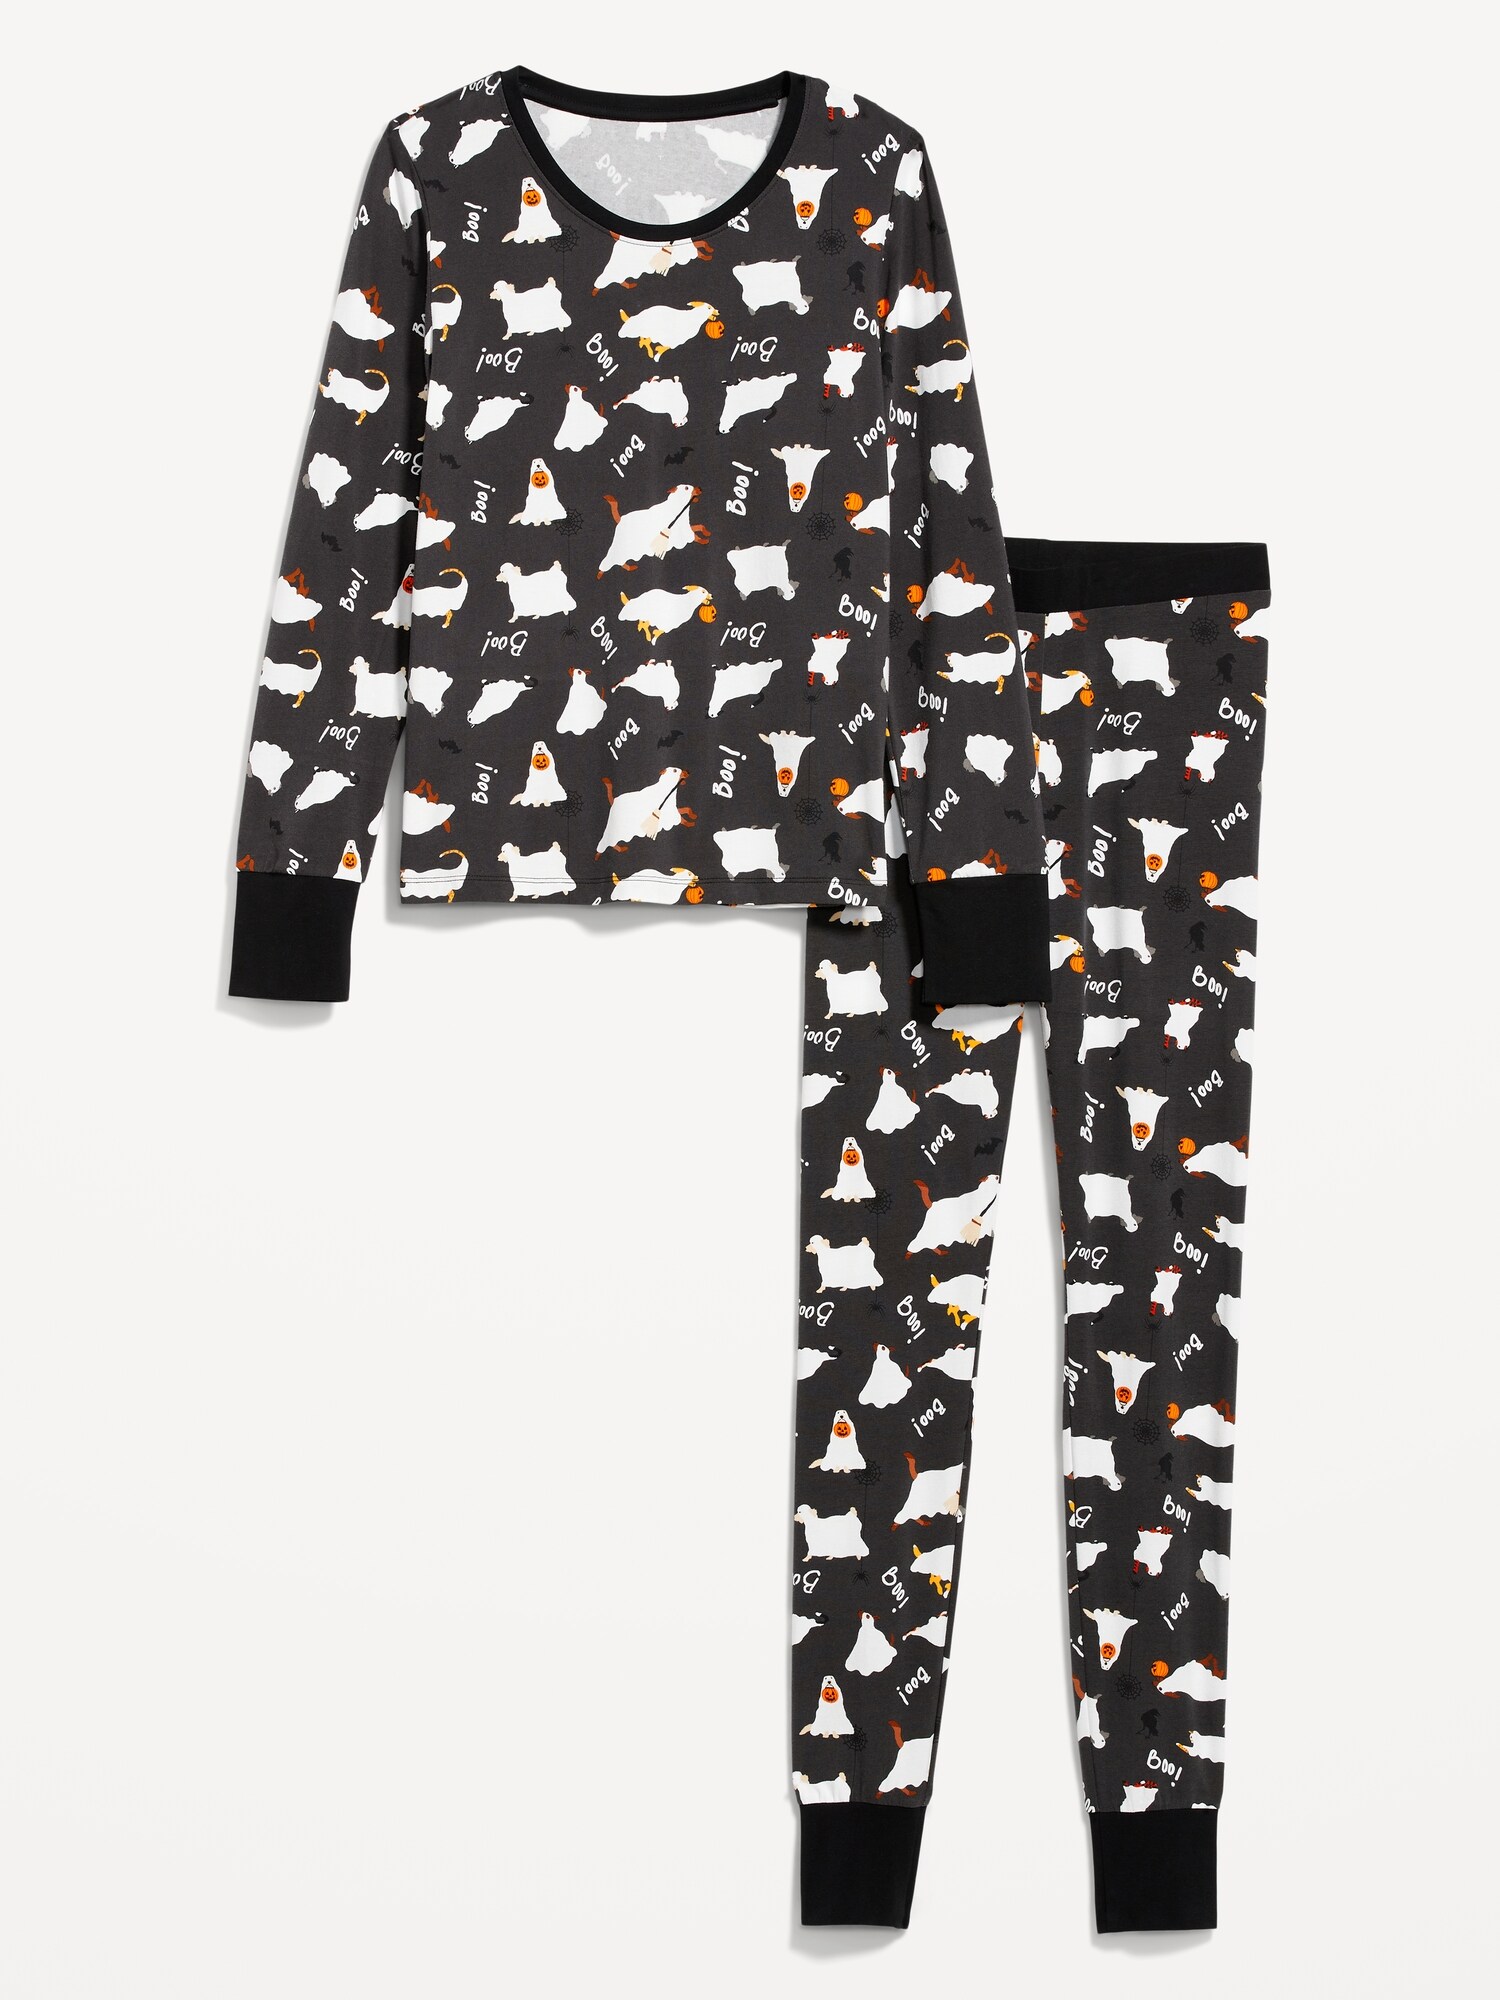 Target's Halloween Pajamas For Women Are Simply Boo-tiful